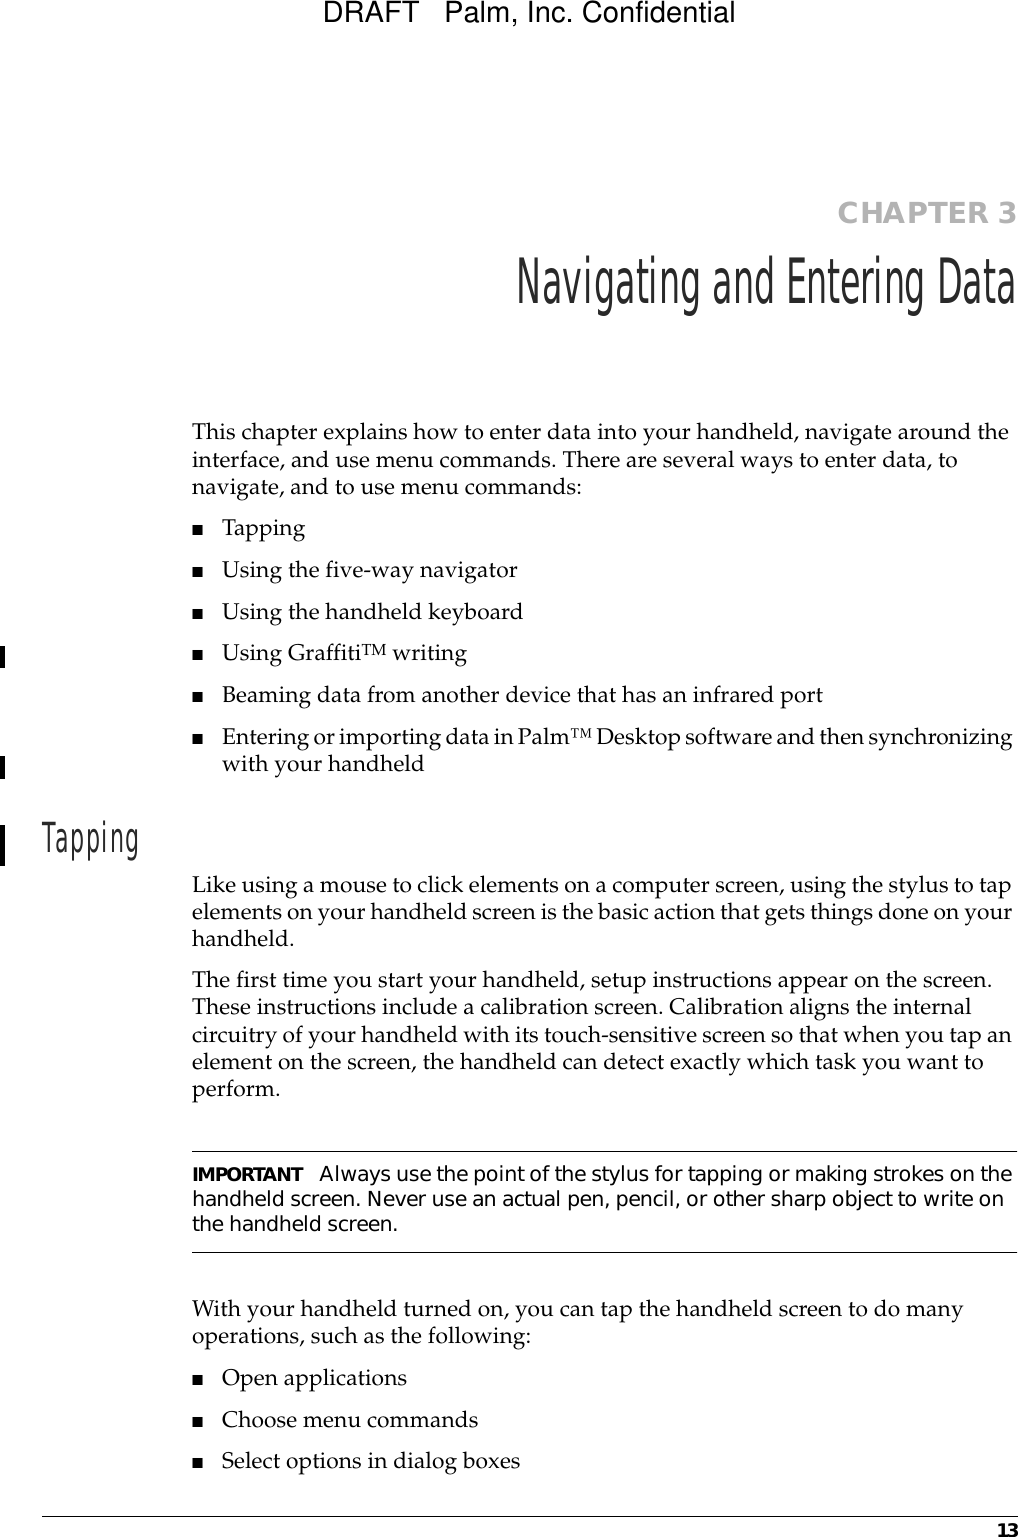 13CHAPTER 3Navigating and Entering DataThis chapter explains how to enter data into your handheld, navigate around the interface, and use menu commands. There are several ways to enter data, to navigate, and to use menu commands:■Tapping■Using the five-way navigator■Using the handheld keyboard■Using GraffitiTM writing■Beaming data from another device that has an infrared port ■Entering or importing data in Palm™ Desktop software and then synchronizing with your handheldTapping Like using a mouse to click elements on a computer screen, using the stylus to tap elements on your handheld screen is the basic action that gets things done on your handheld.The first time you start your handheld, setup instructions appear on the screen. These instructions include a calibration screen. Calibration aligns the internal circuitry of your handheld with its touch-sensitive screen so that when you tap an element on the screen, the handheld can detect exactly which task you want to perform. IMPORTANT Always use the point of the stylus for tapping or making strokes on the handheld screen. Never use an actual pen, pencil, or other sharp object to write on the handheld screen.With your handheld turned on, you can tap the handheld screen to do many operations, such as the following:■Open applications■Choose menu commands■Select options in dialog boxesDRAFT   Palm, Inc. Confidential